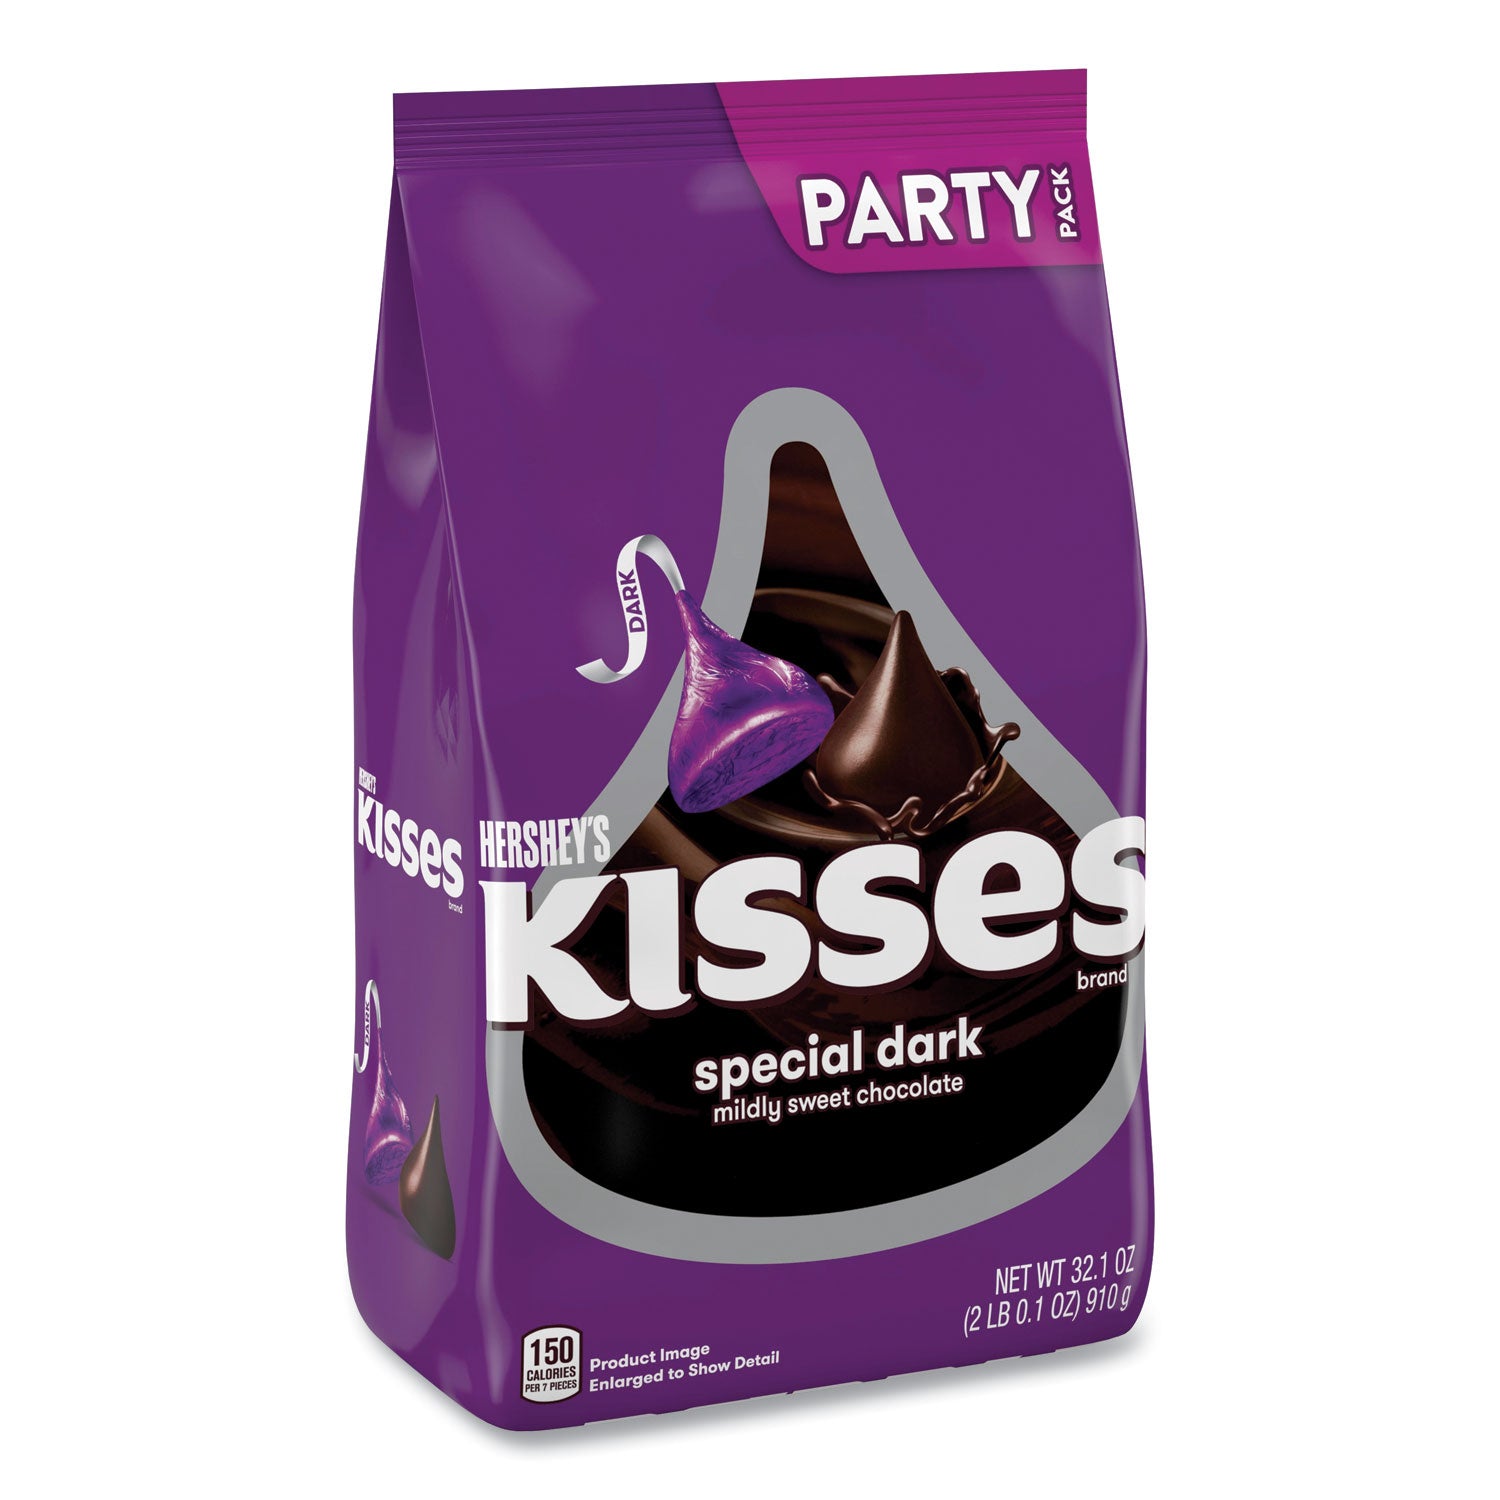 kisses-special-dark-chocolate-candy-party-pack-321-oz-bag-ships-in-1-3-business-days_grr24600419 - 1